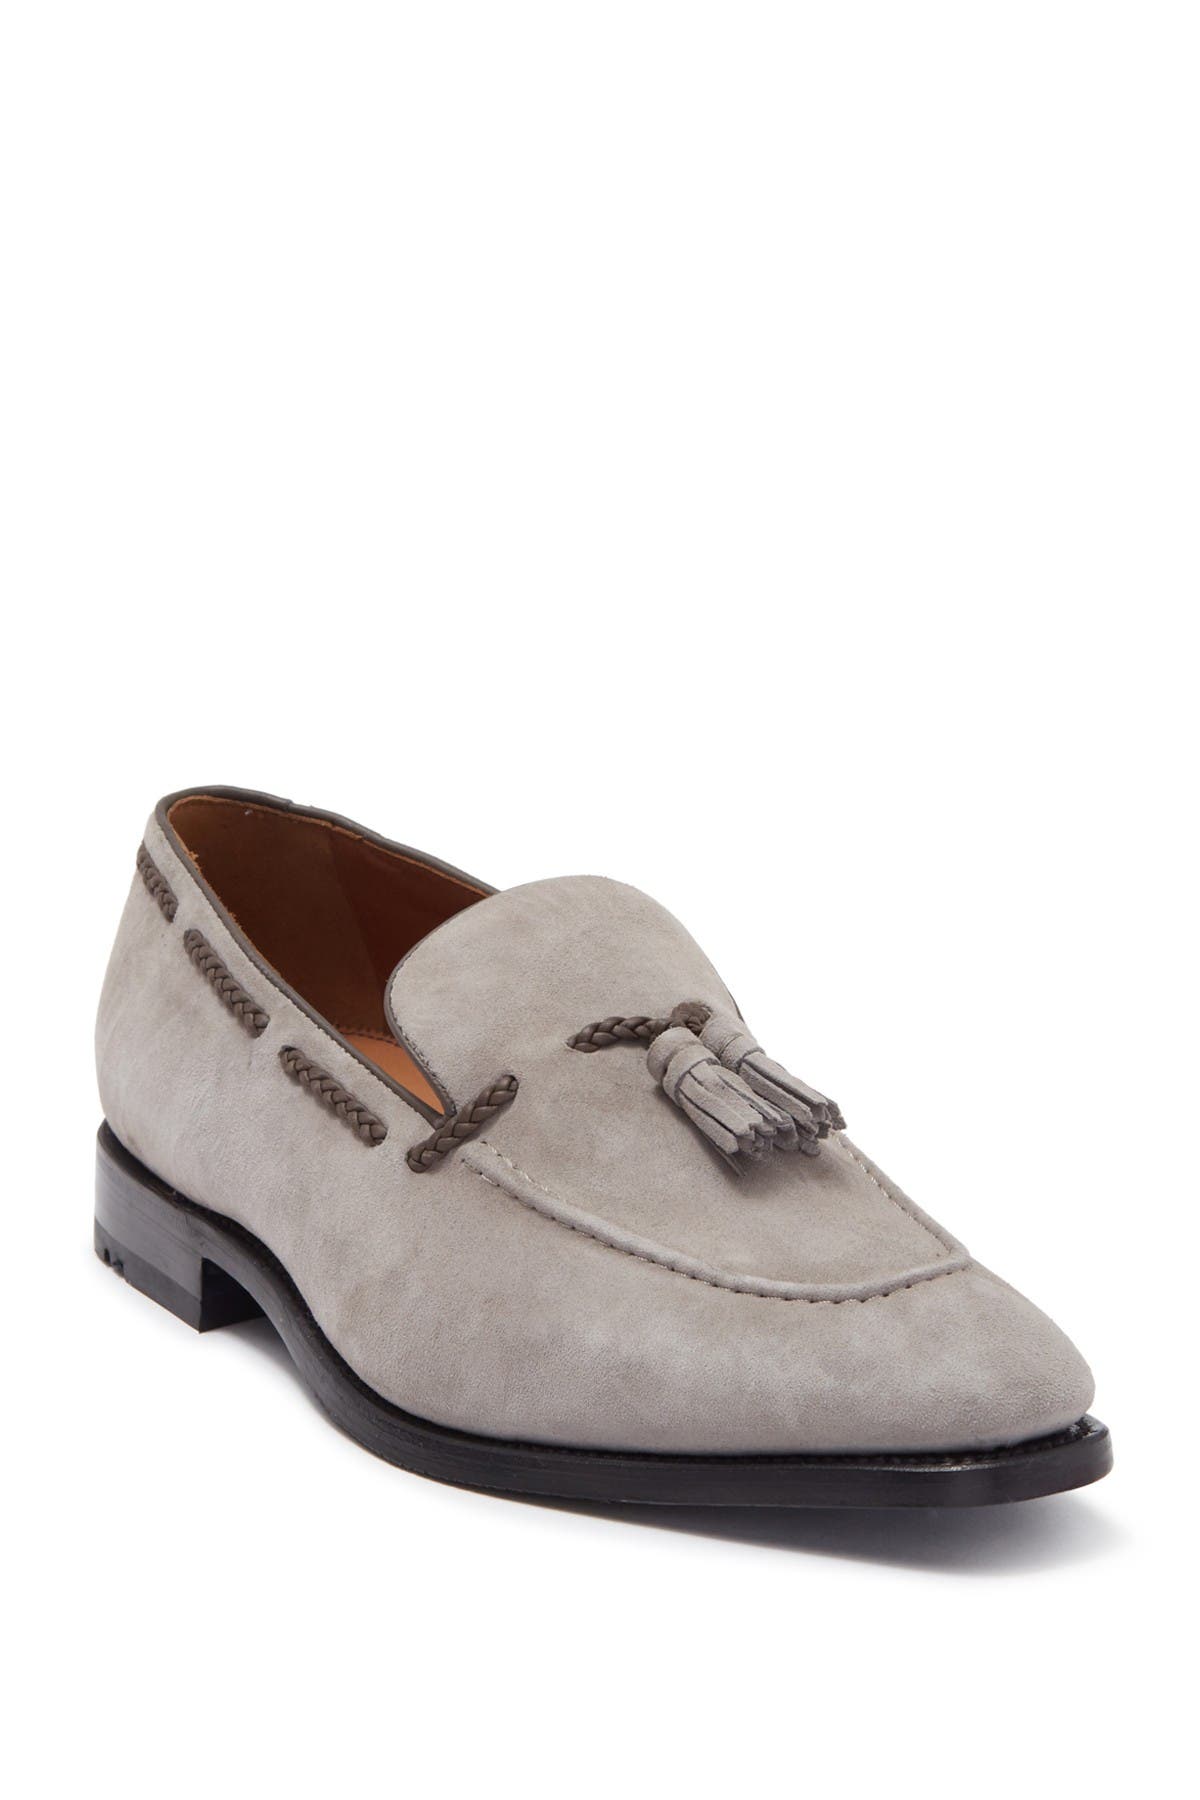 code mens loafers